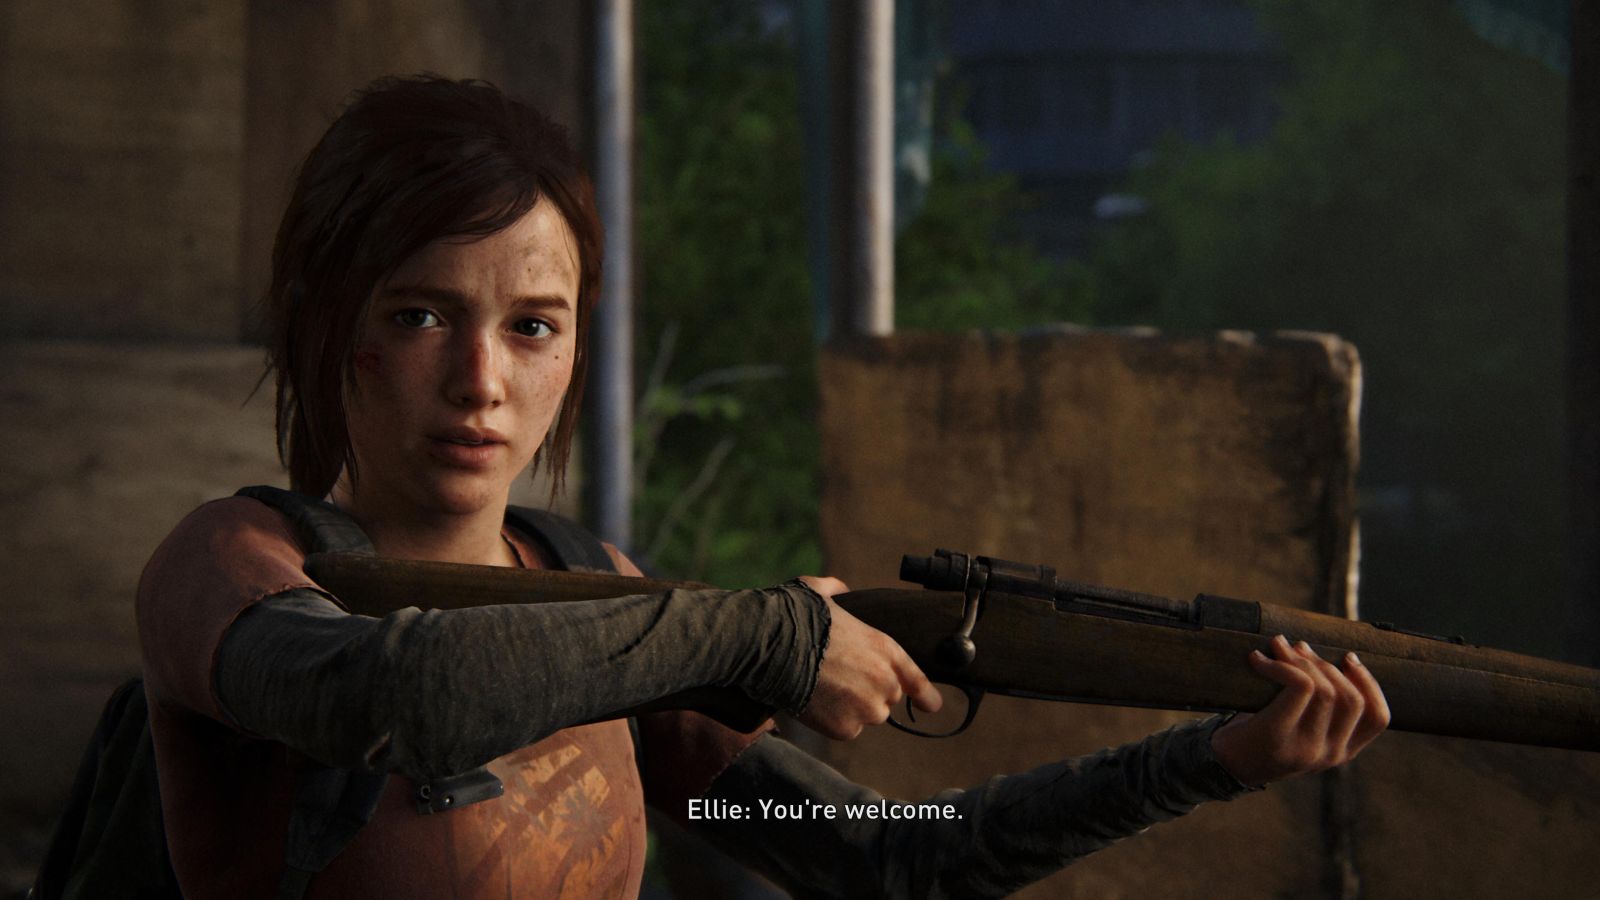 The Last of Us Part 1 Will Have PC-Specific Features, but Can Your Rig Run  It? 